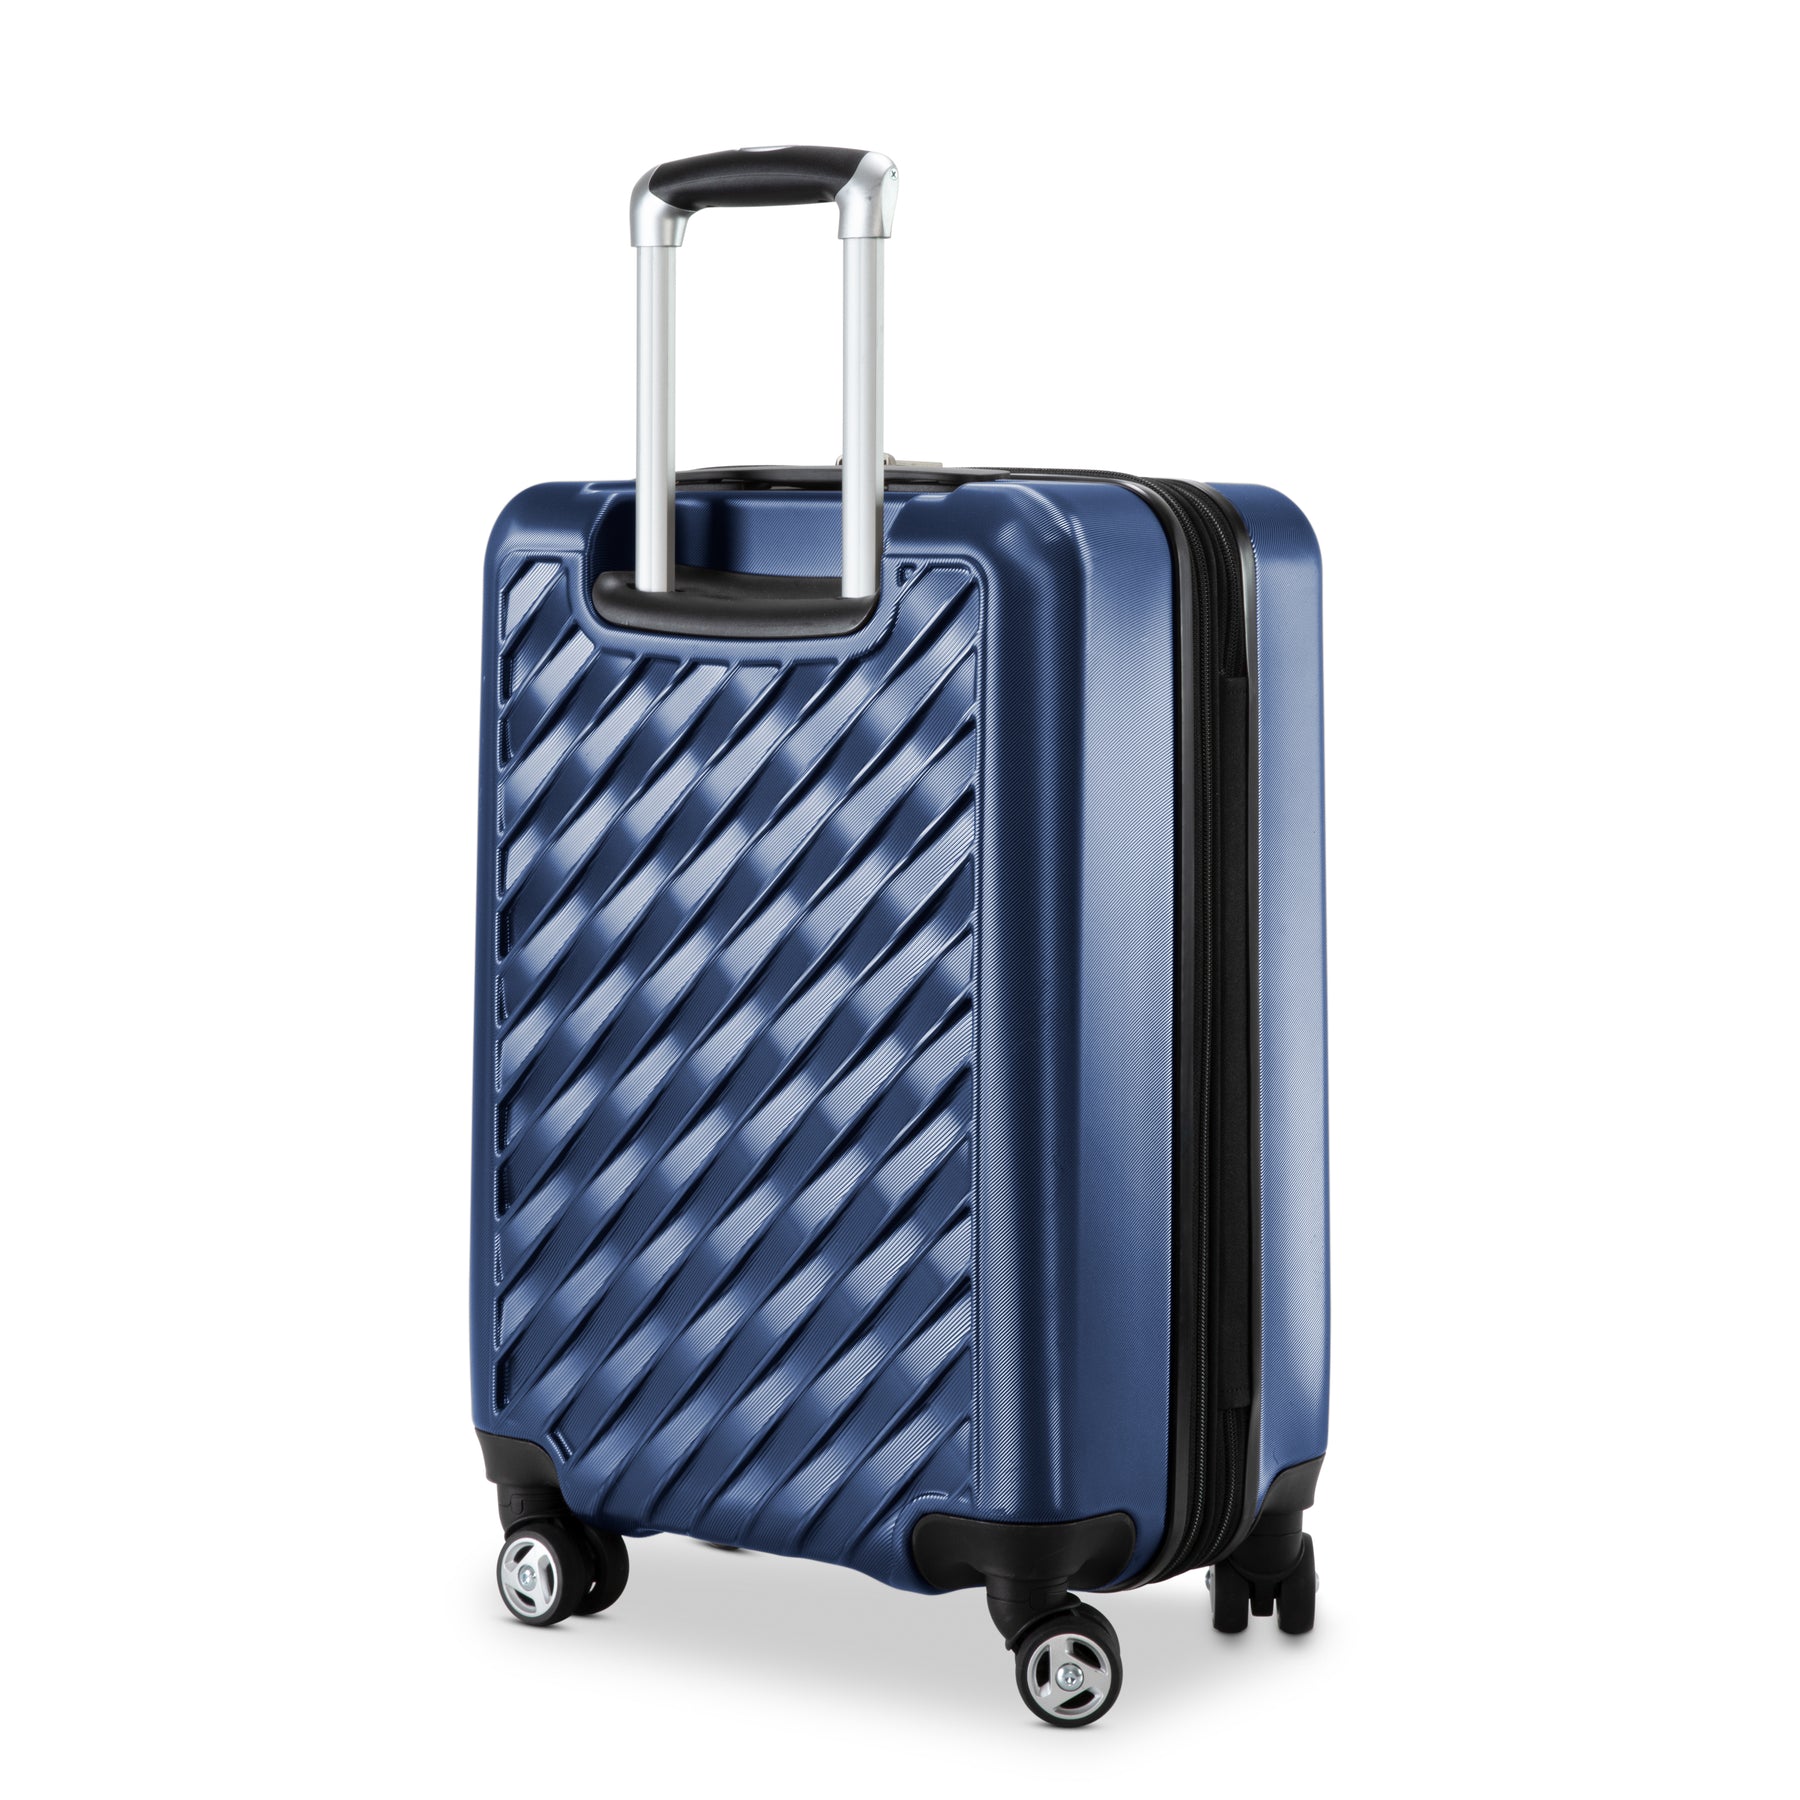 6 Best Carry-On Suitcases: Hard-Sided Hand Luggage for Packing